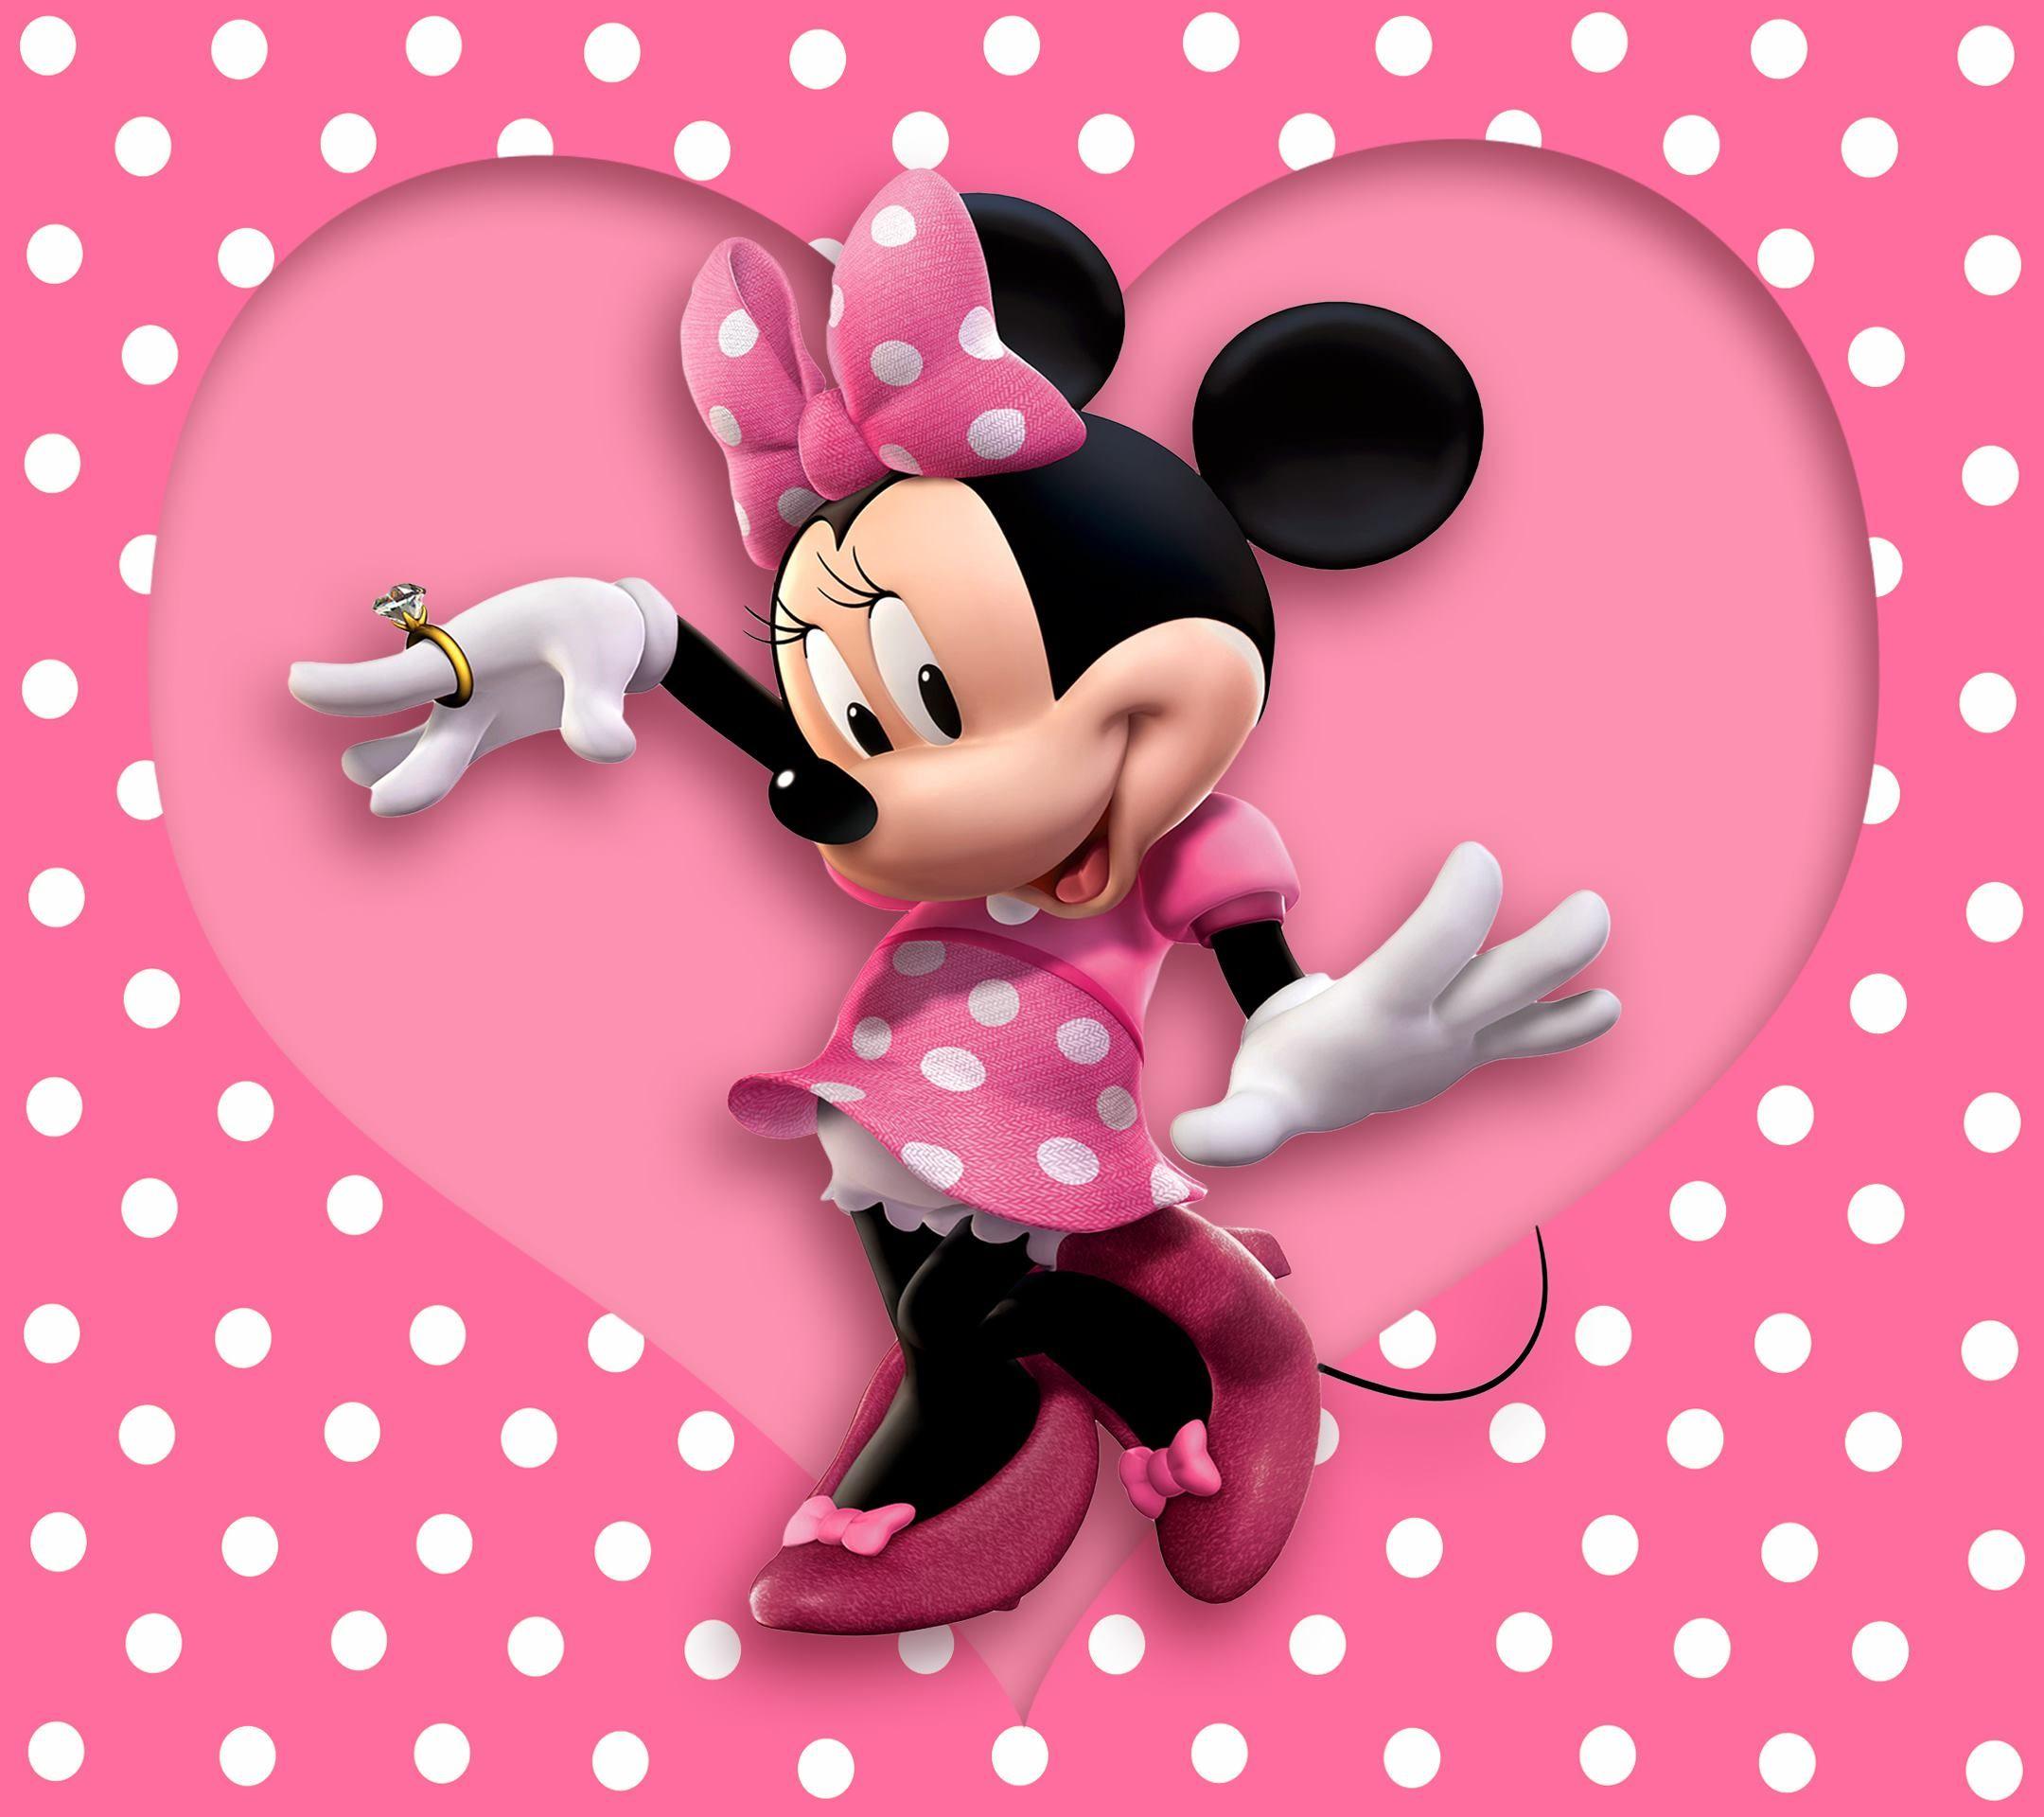 Wallpaper Mickey Mouse Holding Pink Heart Illustration, Background -  Download Free Image